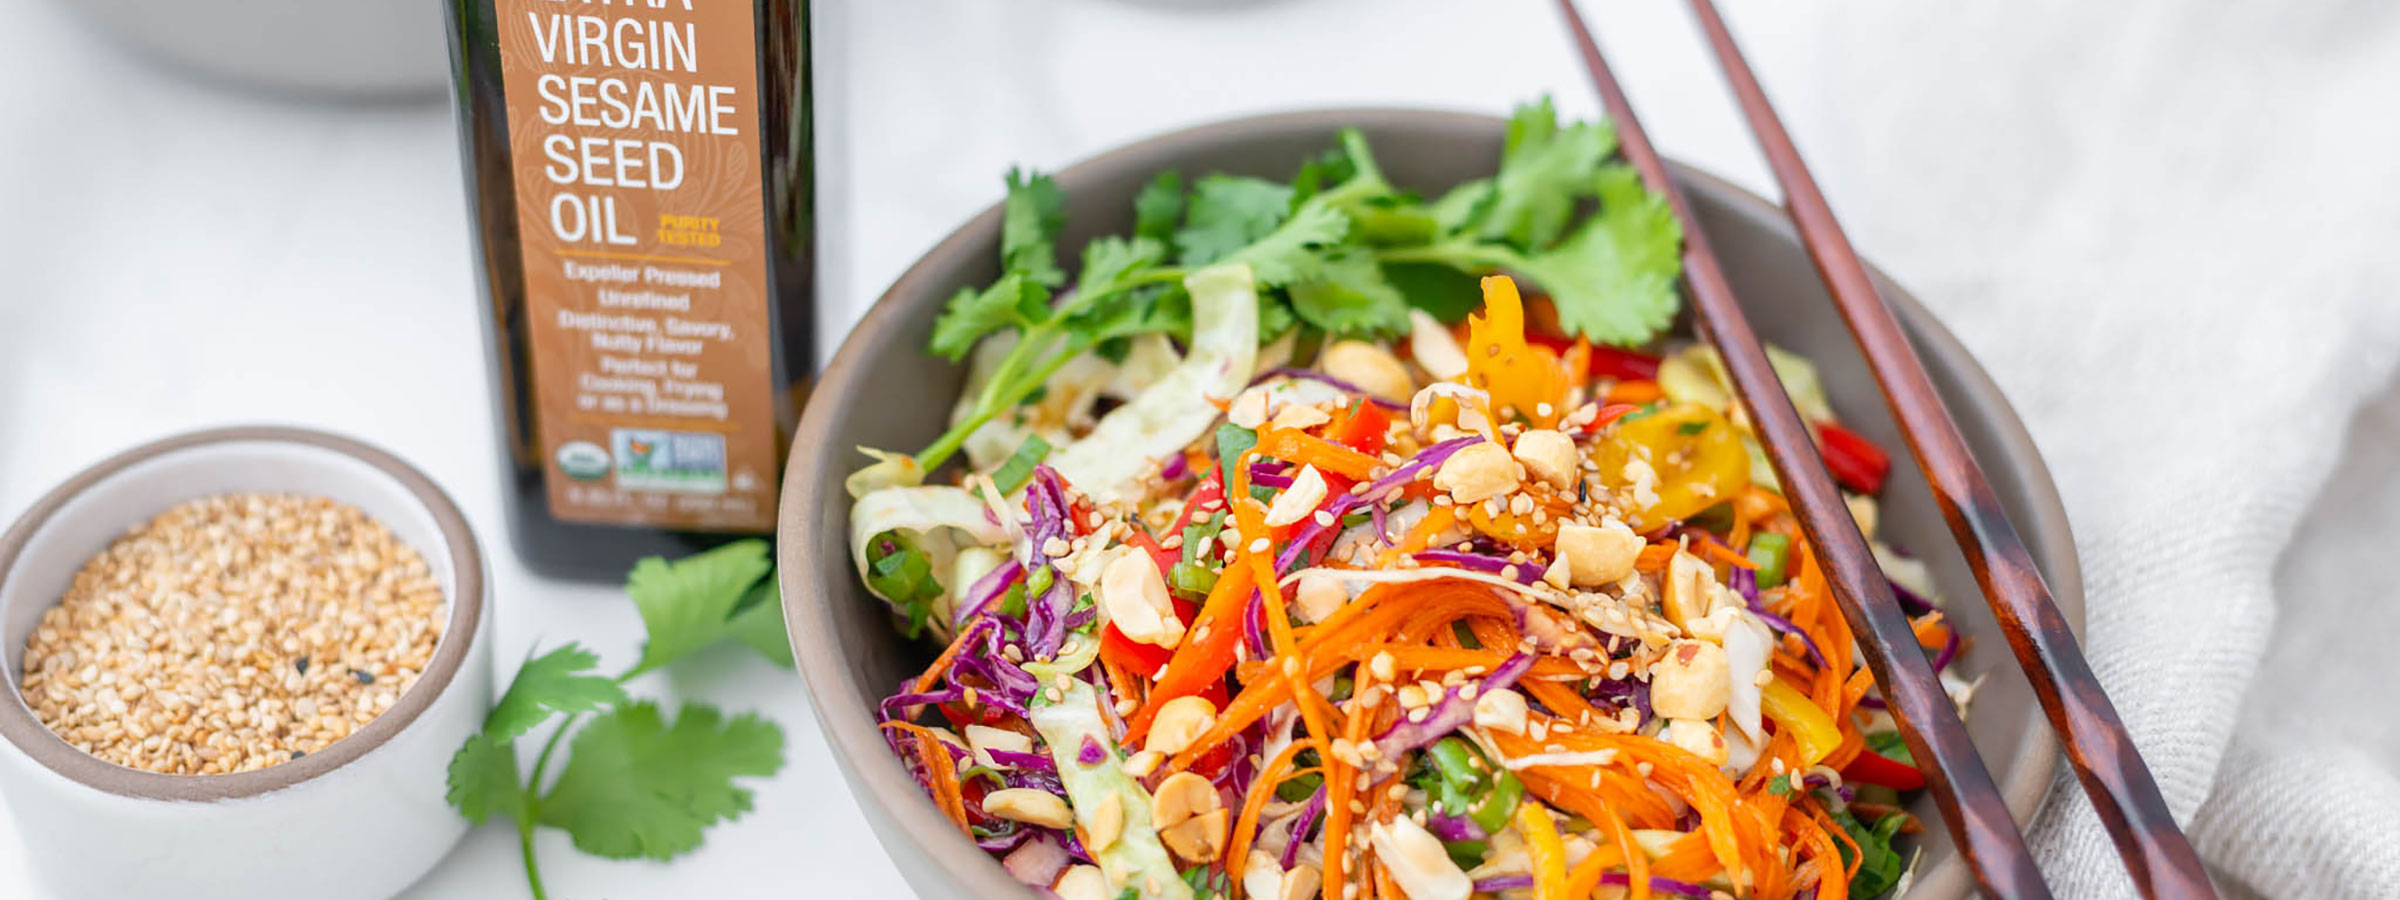 colorful bowl of Thai salad with chopsticks resting on the bowl, a bottle of NOW Sesame Seed Oil to the left and a small bowl of sesame seeds to the left